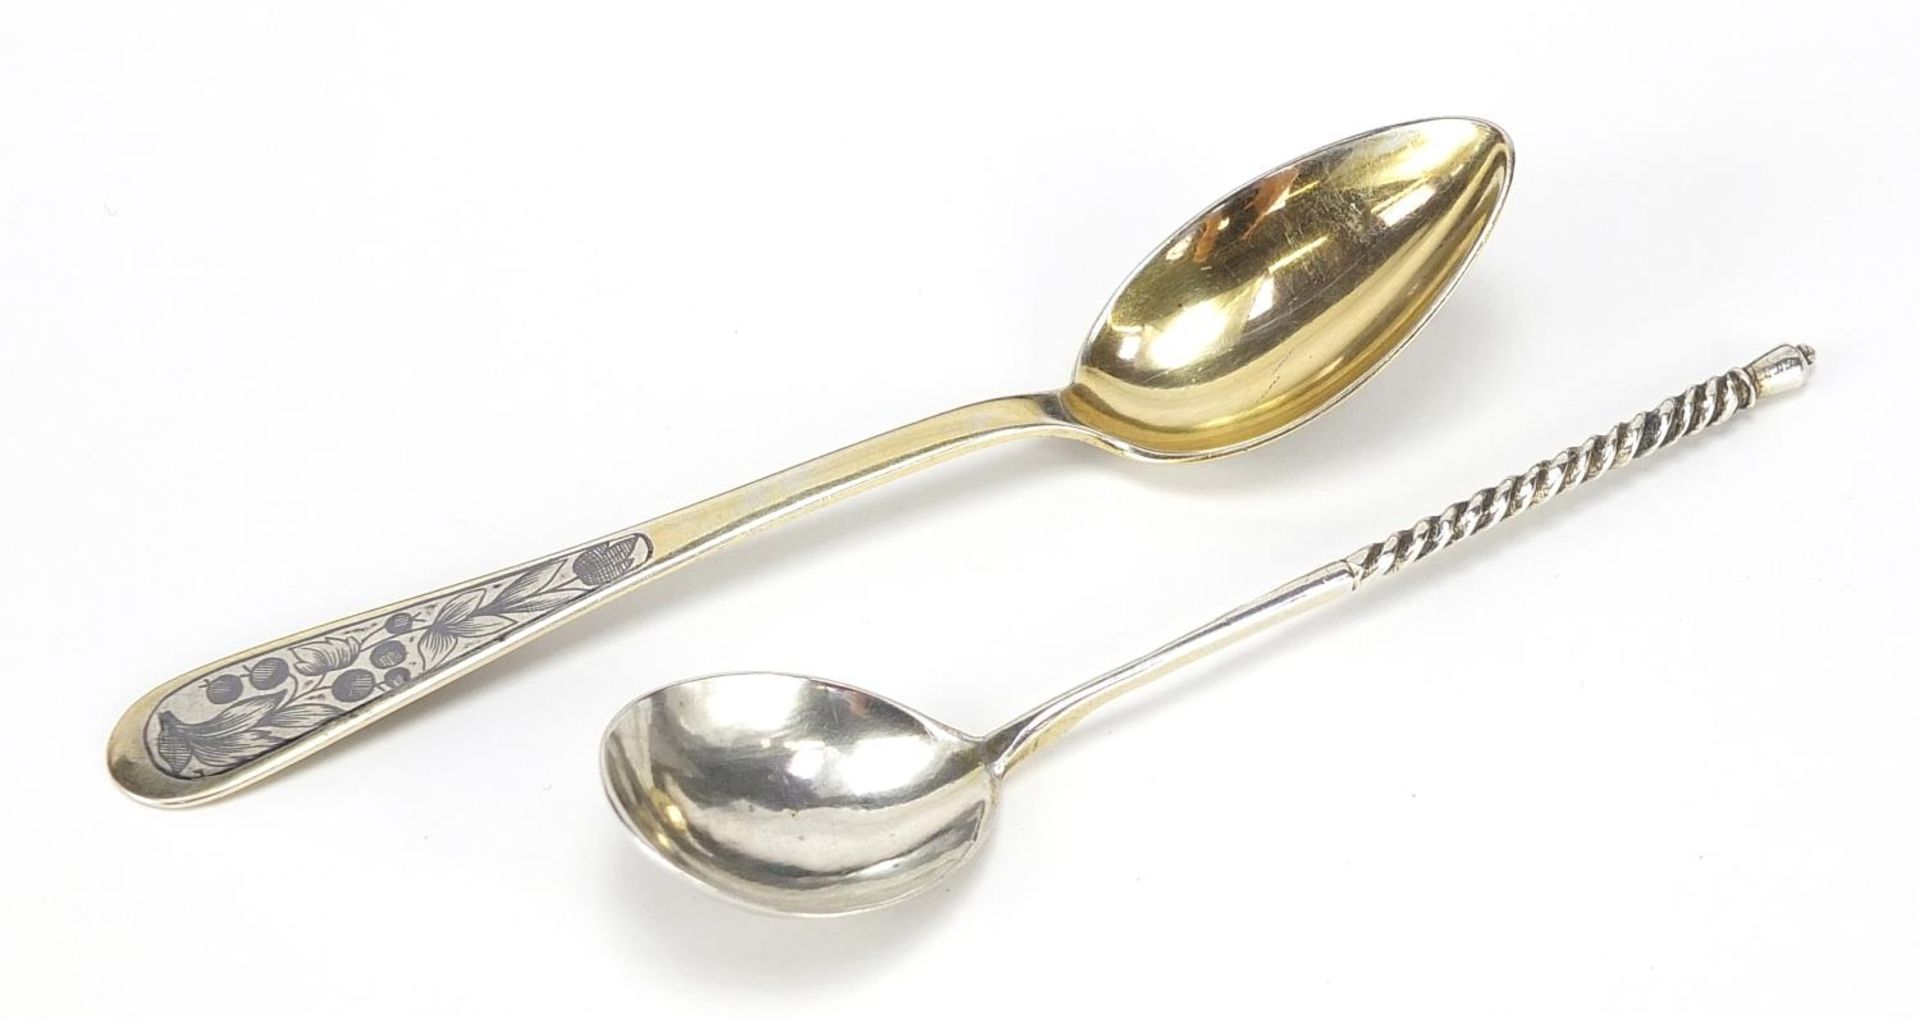 Two Russian silver niello work spoons, one with impressed marks for Konstantin Maximovich